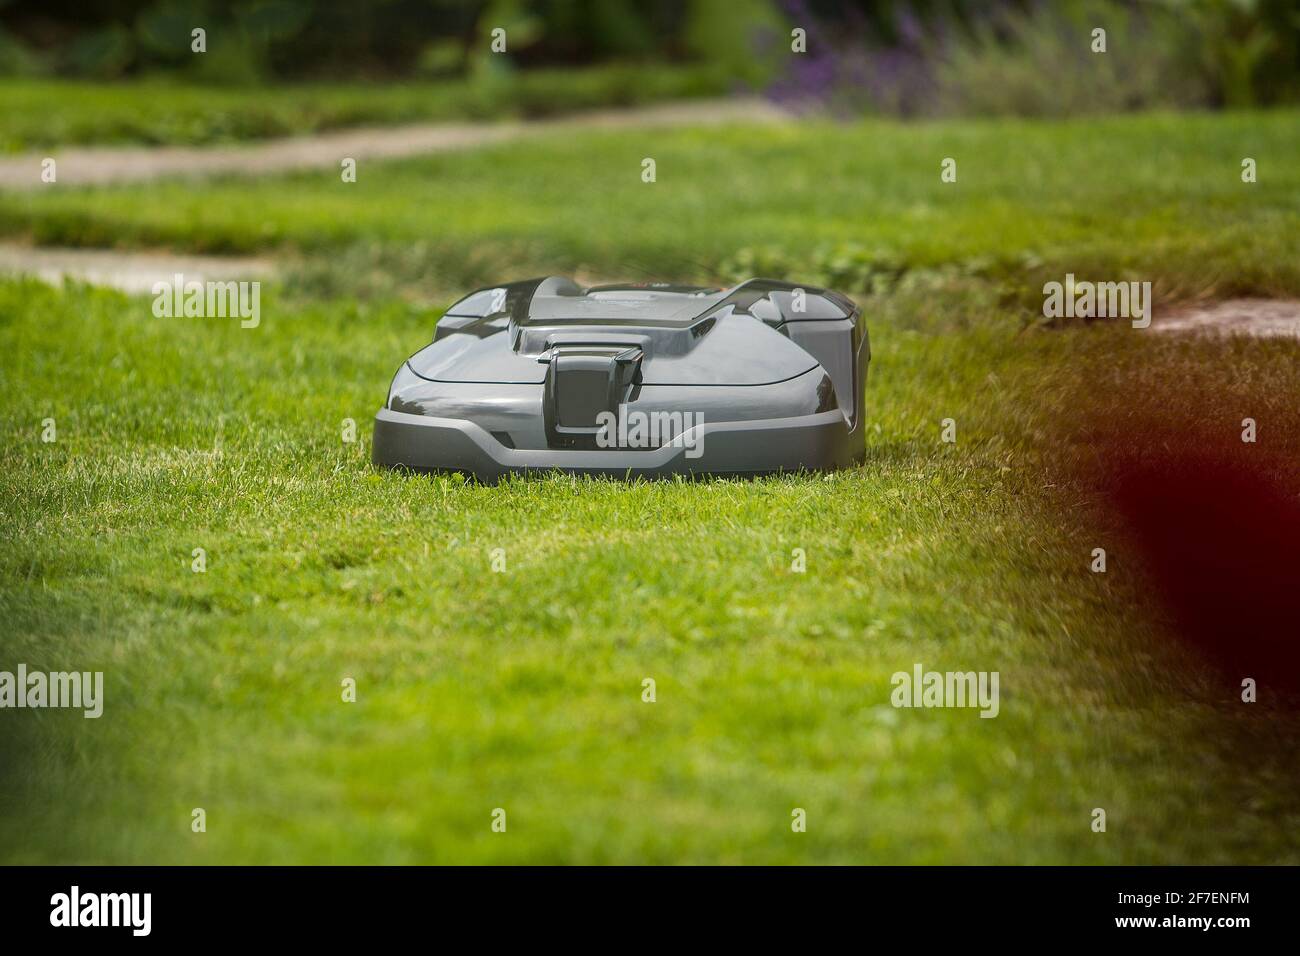 A robotic mower in dark green shiny color  is mowing a fancy lawn, viewed from a low angle. Stock Photo